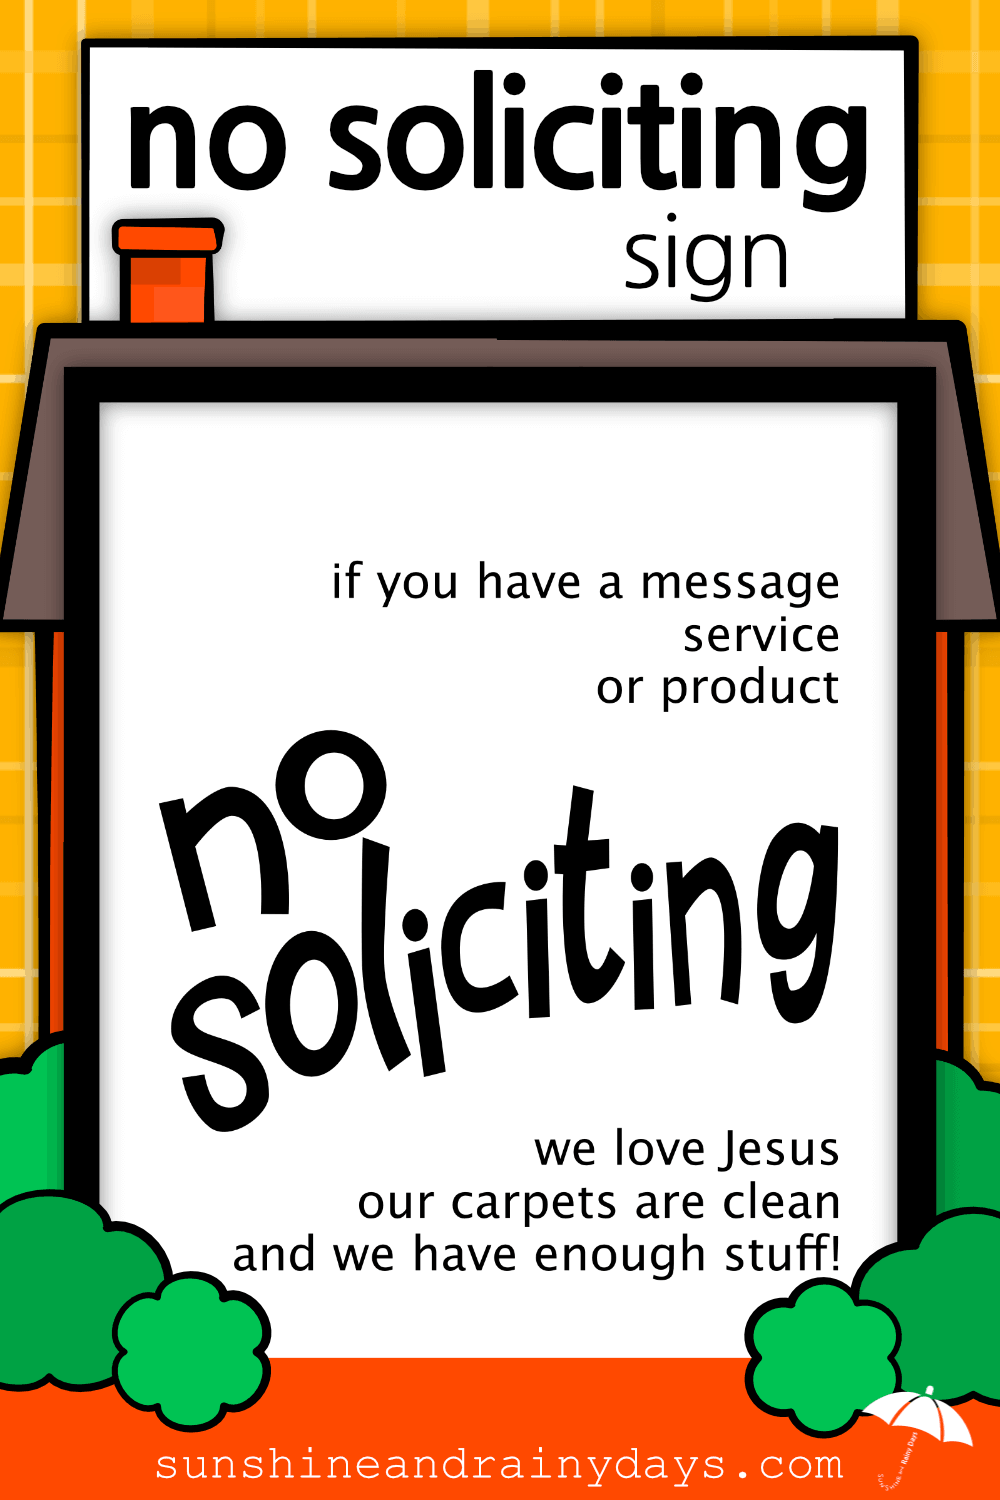 No Soliciting Sign - Sunshine and Rainy Days